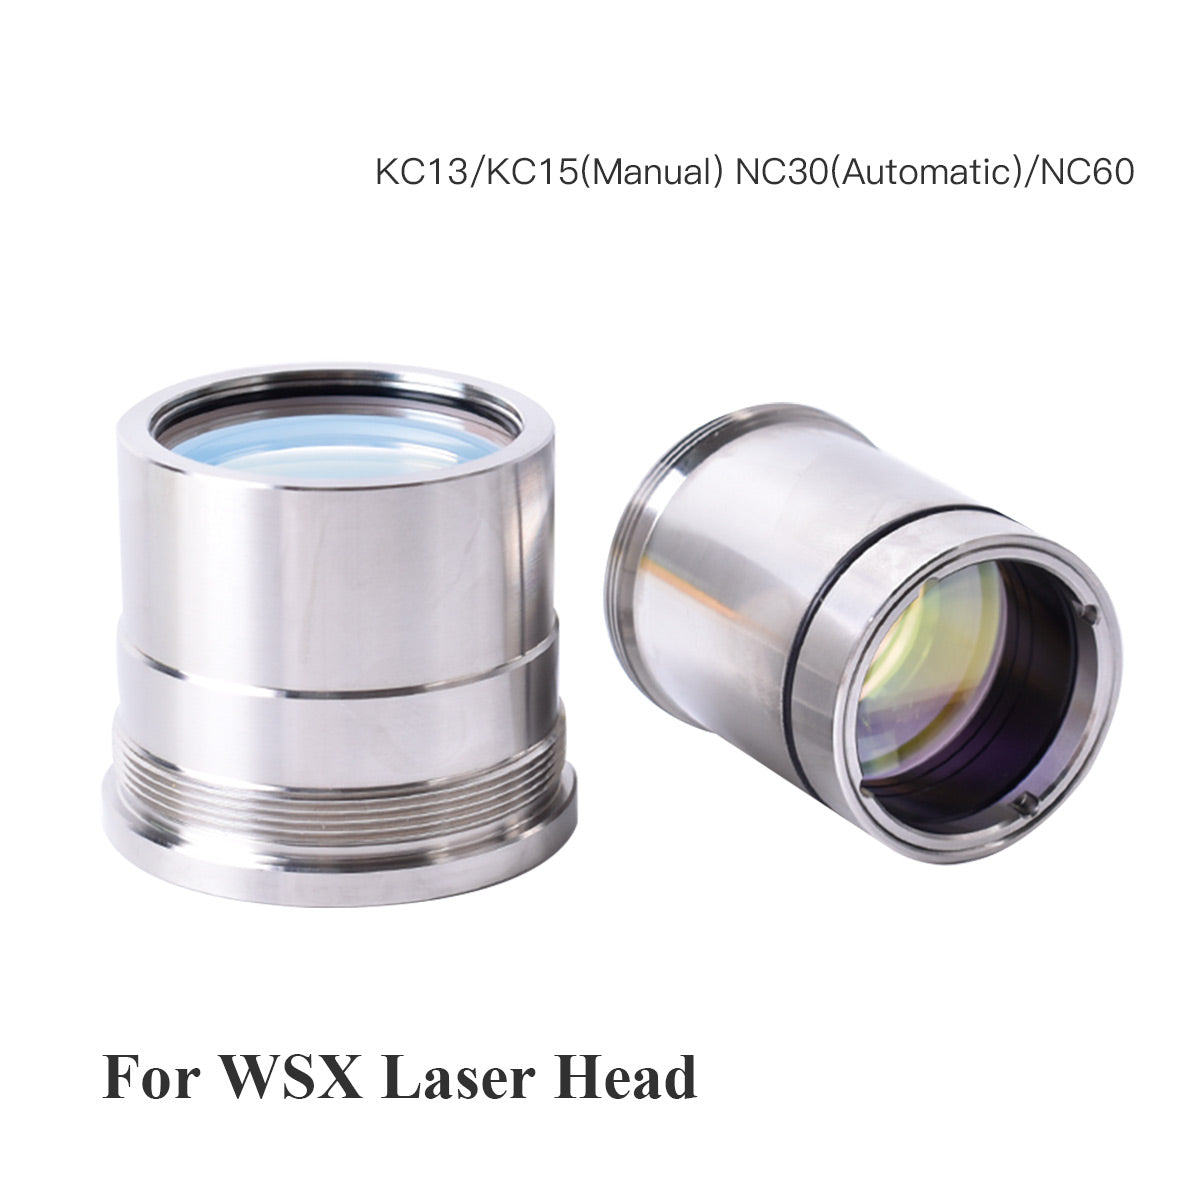 Startnow D30 37 F100 Laser Focus Collimating Lens With Lens Holder For WSX KC13 NC60